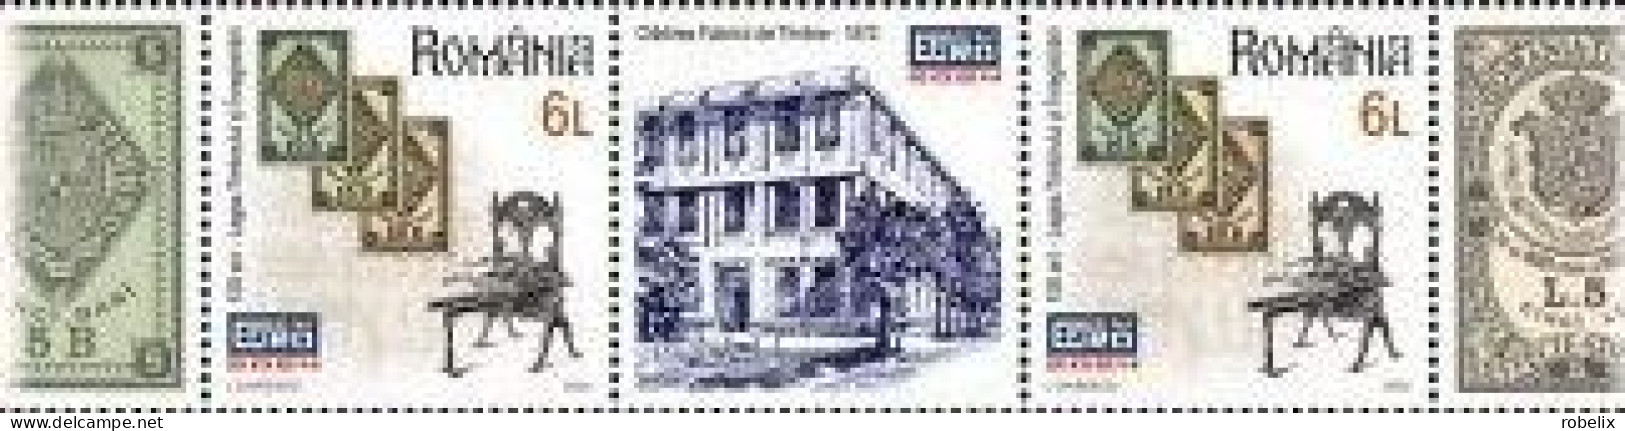 ROMANIA 2024 EFIRO - WORLD STAMP EXHIBITION IN BUCHAREST Strip Of 2 Stamps + 1 Label  MNH** - Philatelic Exhibitions